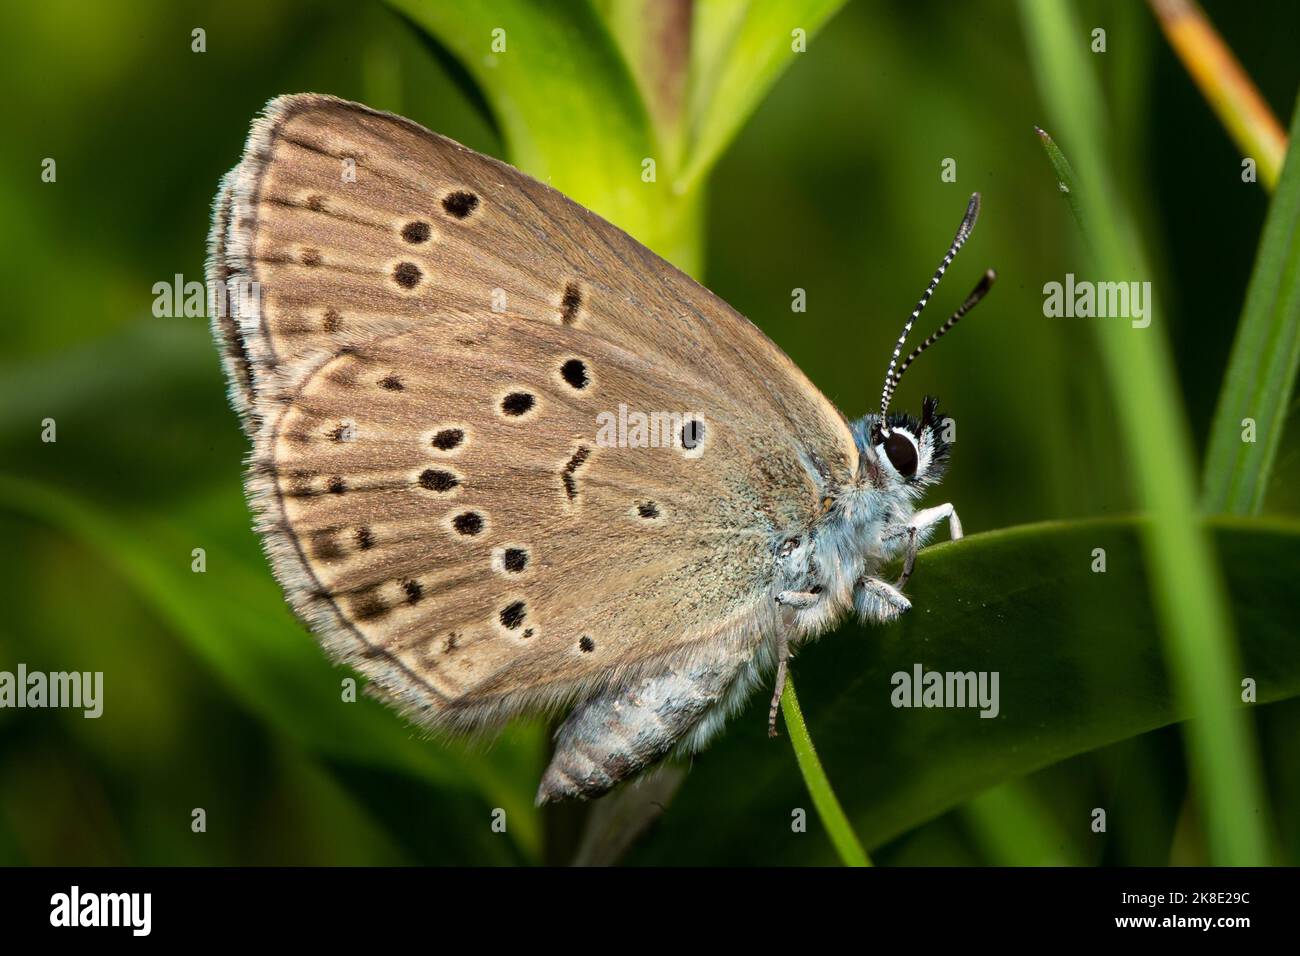 Mountain Alcon blue butterfly with closed wings sitting on green leaf right sighted Stock Photo